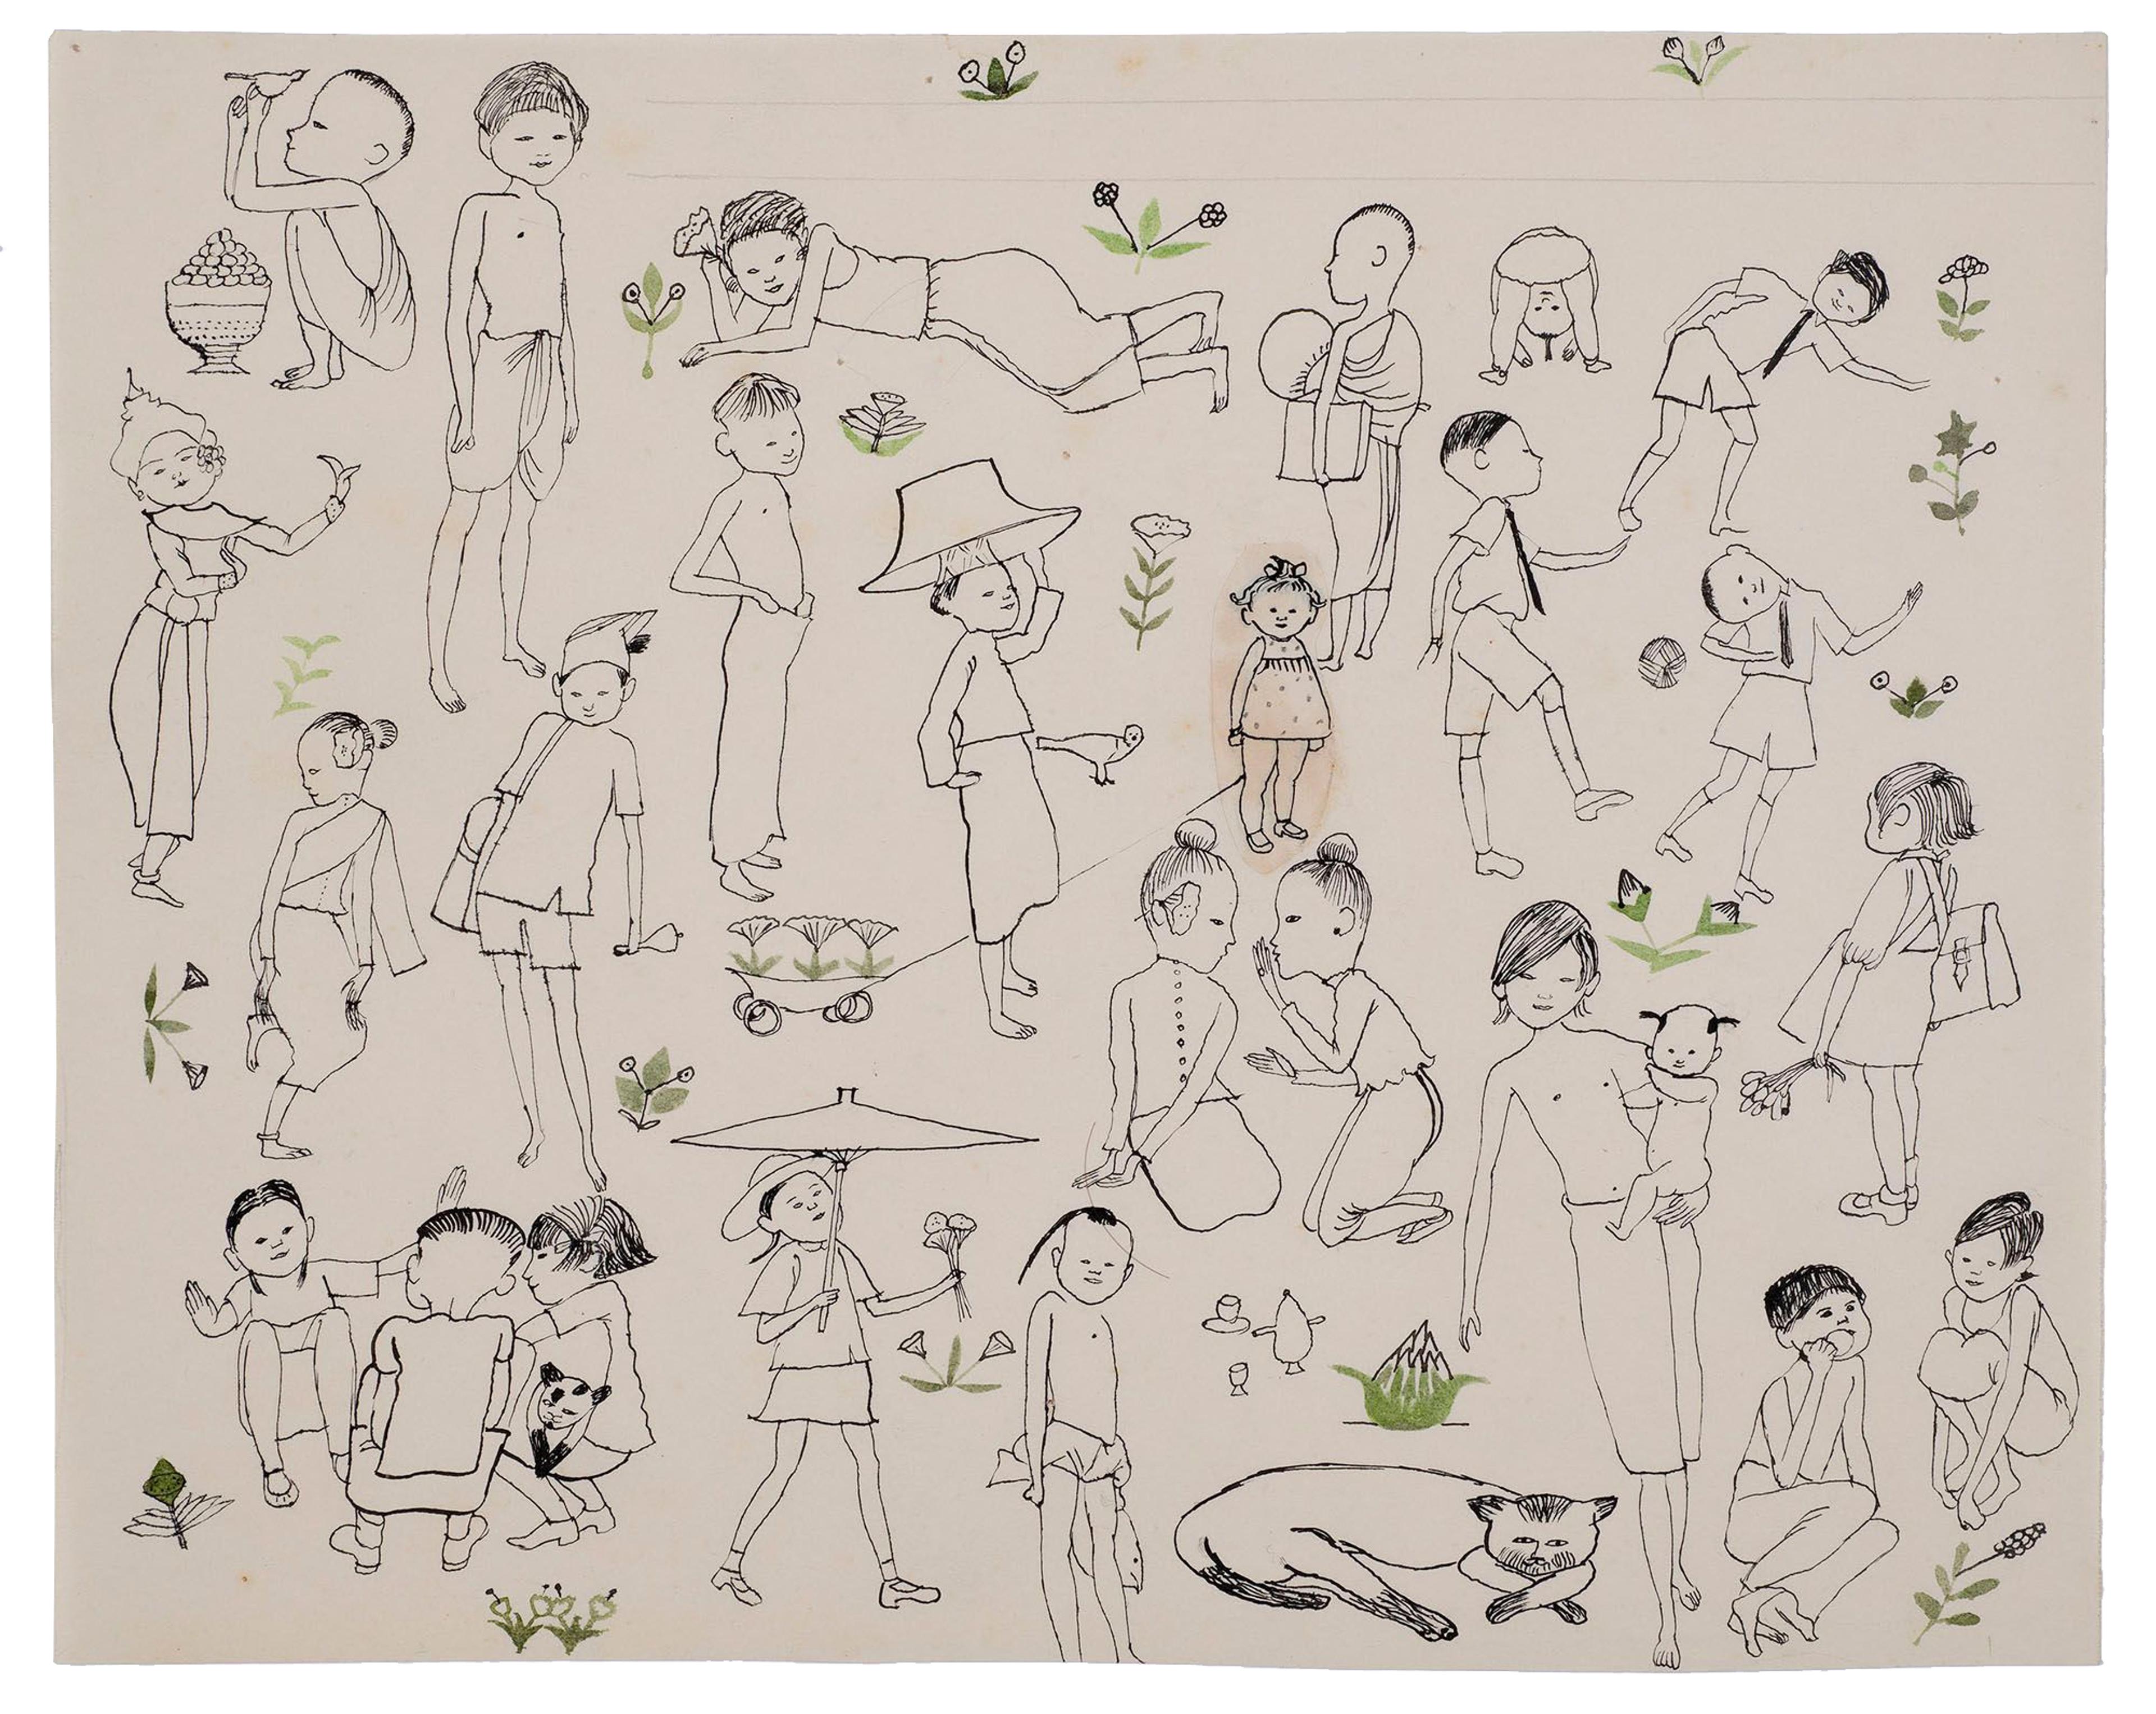 Drawing in black and green ink on white paper of children playing